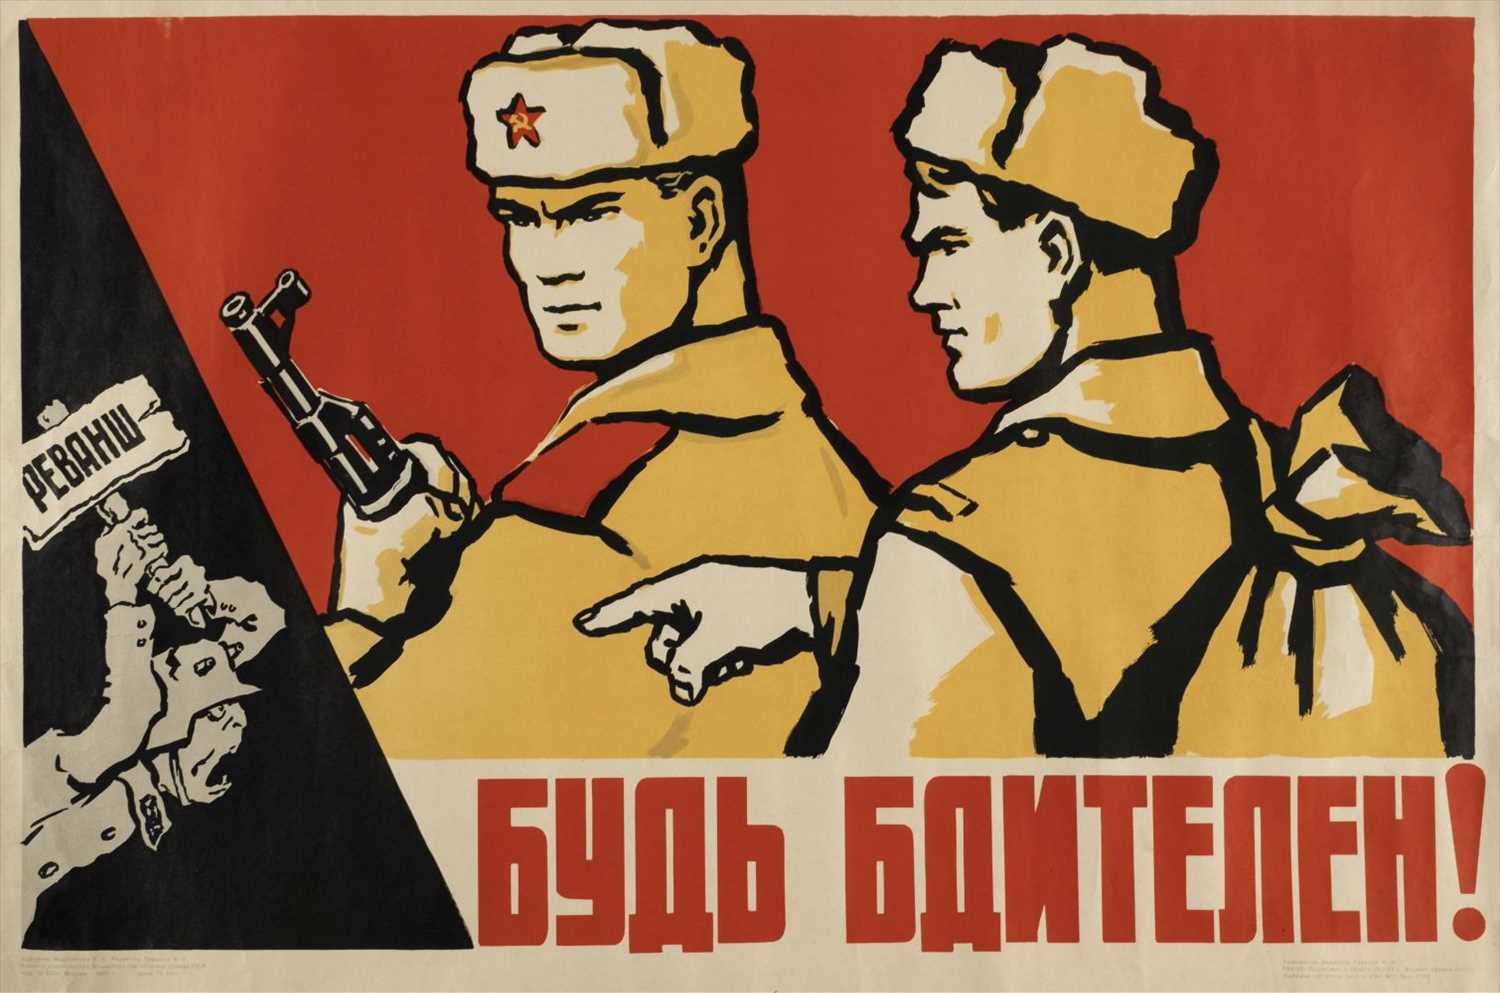 Lot 212 - Posters. A group of 6 Soviet Russia propaganda posters